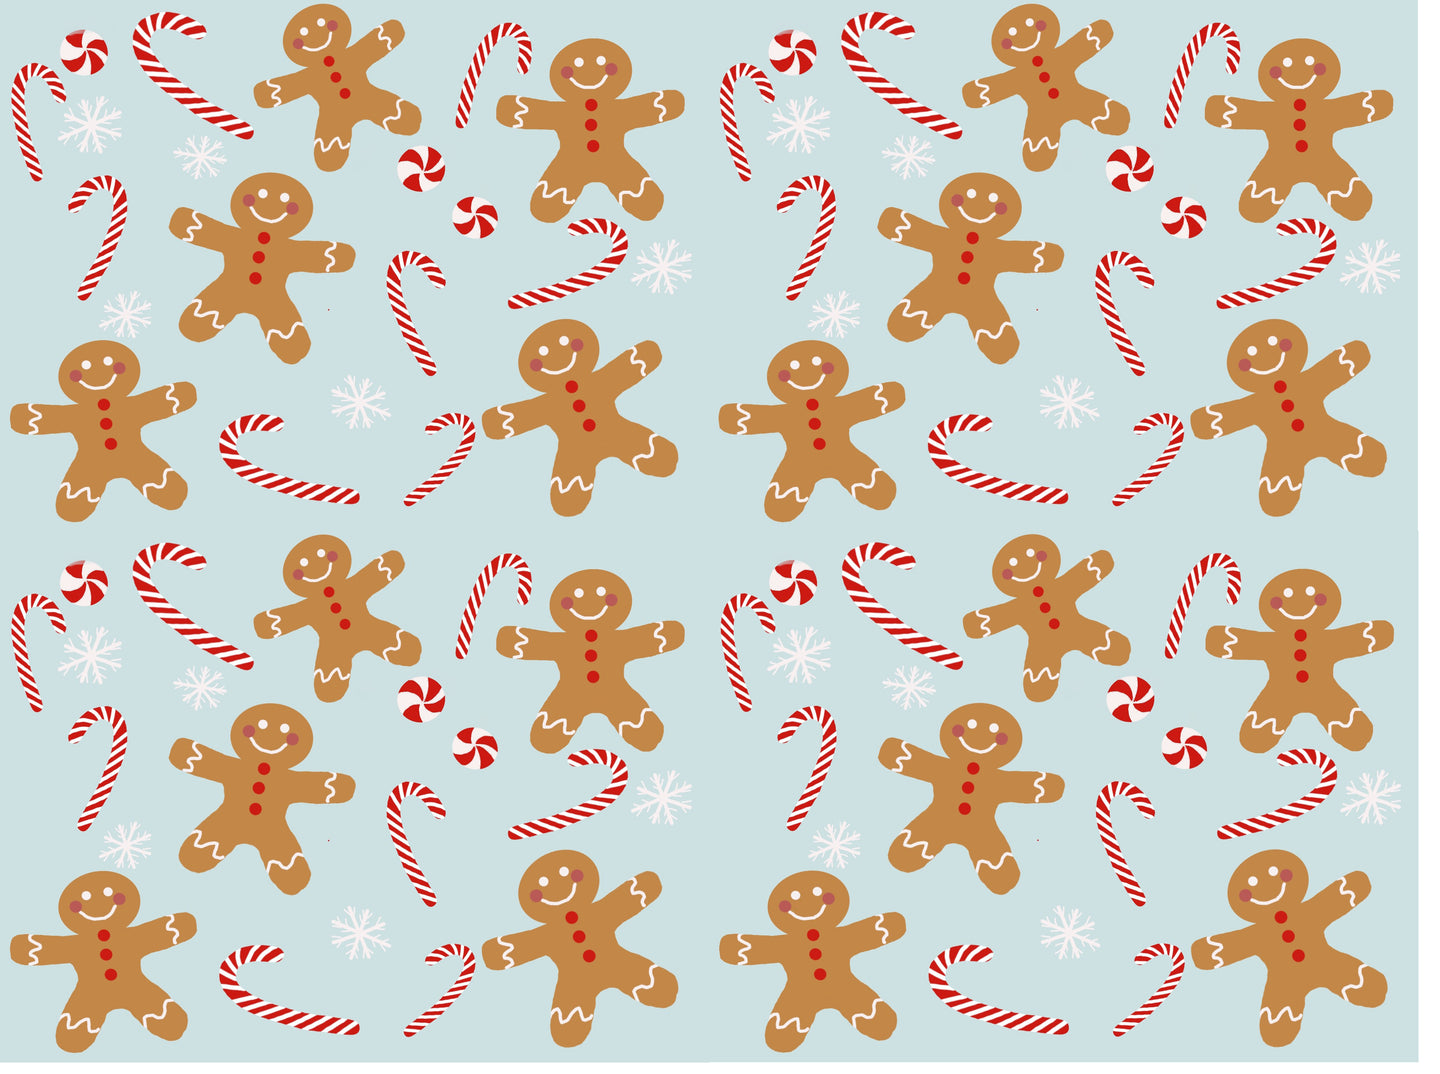 Gingerbread People 2020 - from Nina  - 2-5 day turnaround - Order by 1/2 yard; Description of bases below